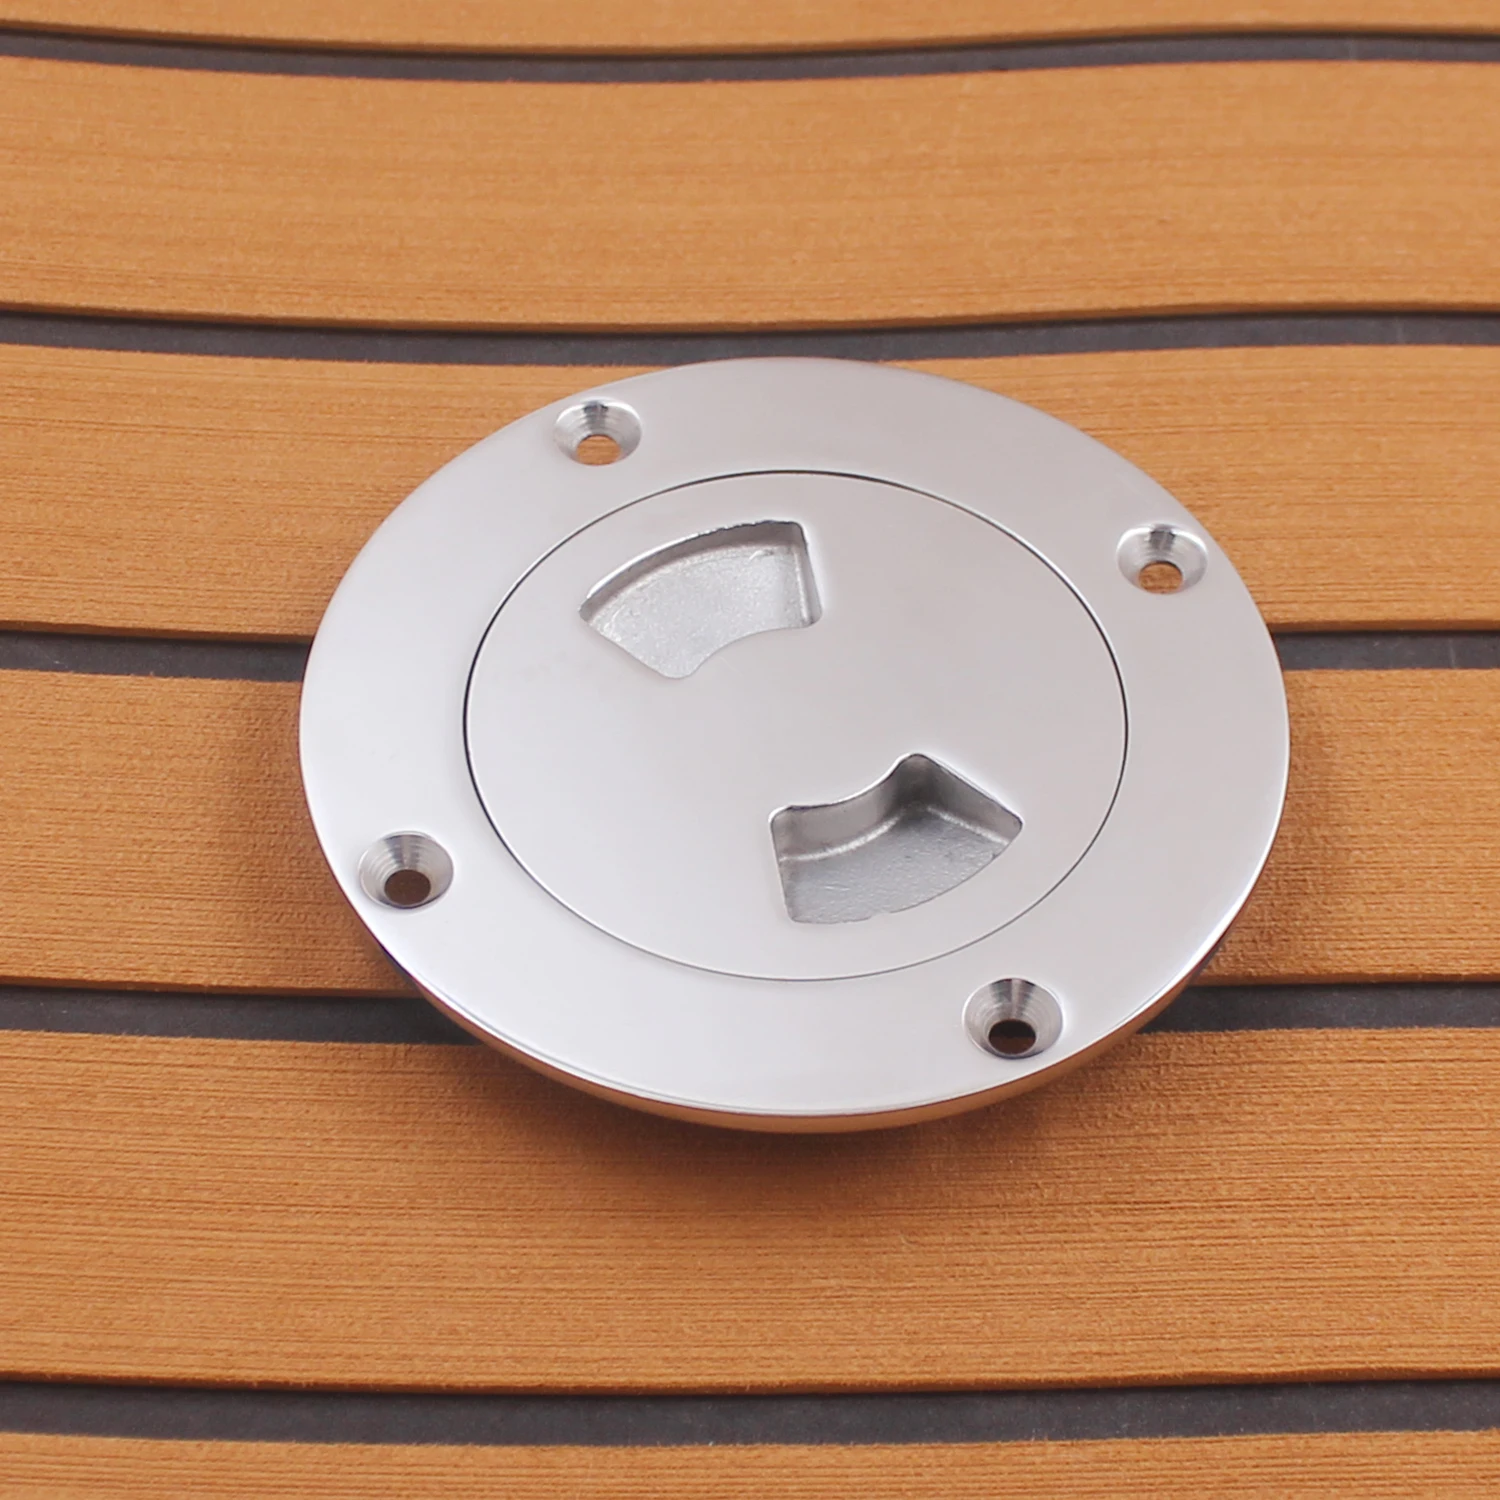 3 inch Round Deck Inspection Access Hatch Cover Boat Screw Out Deck Inspection Plate For Yacht Marine enlarge